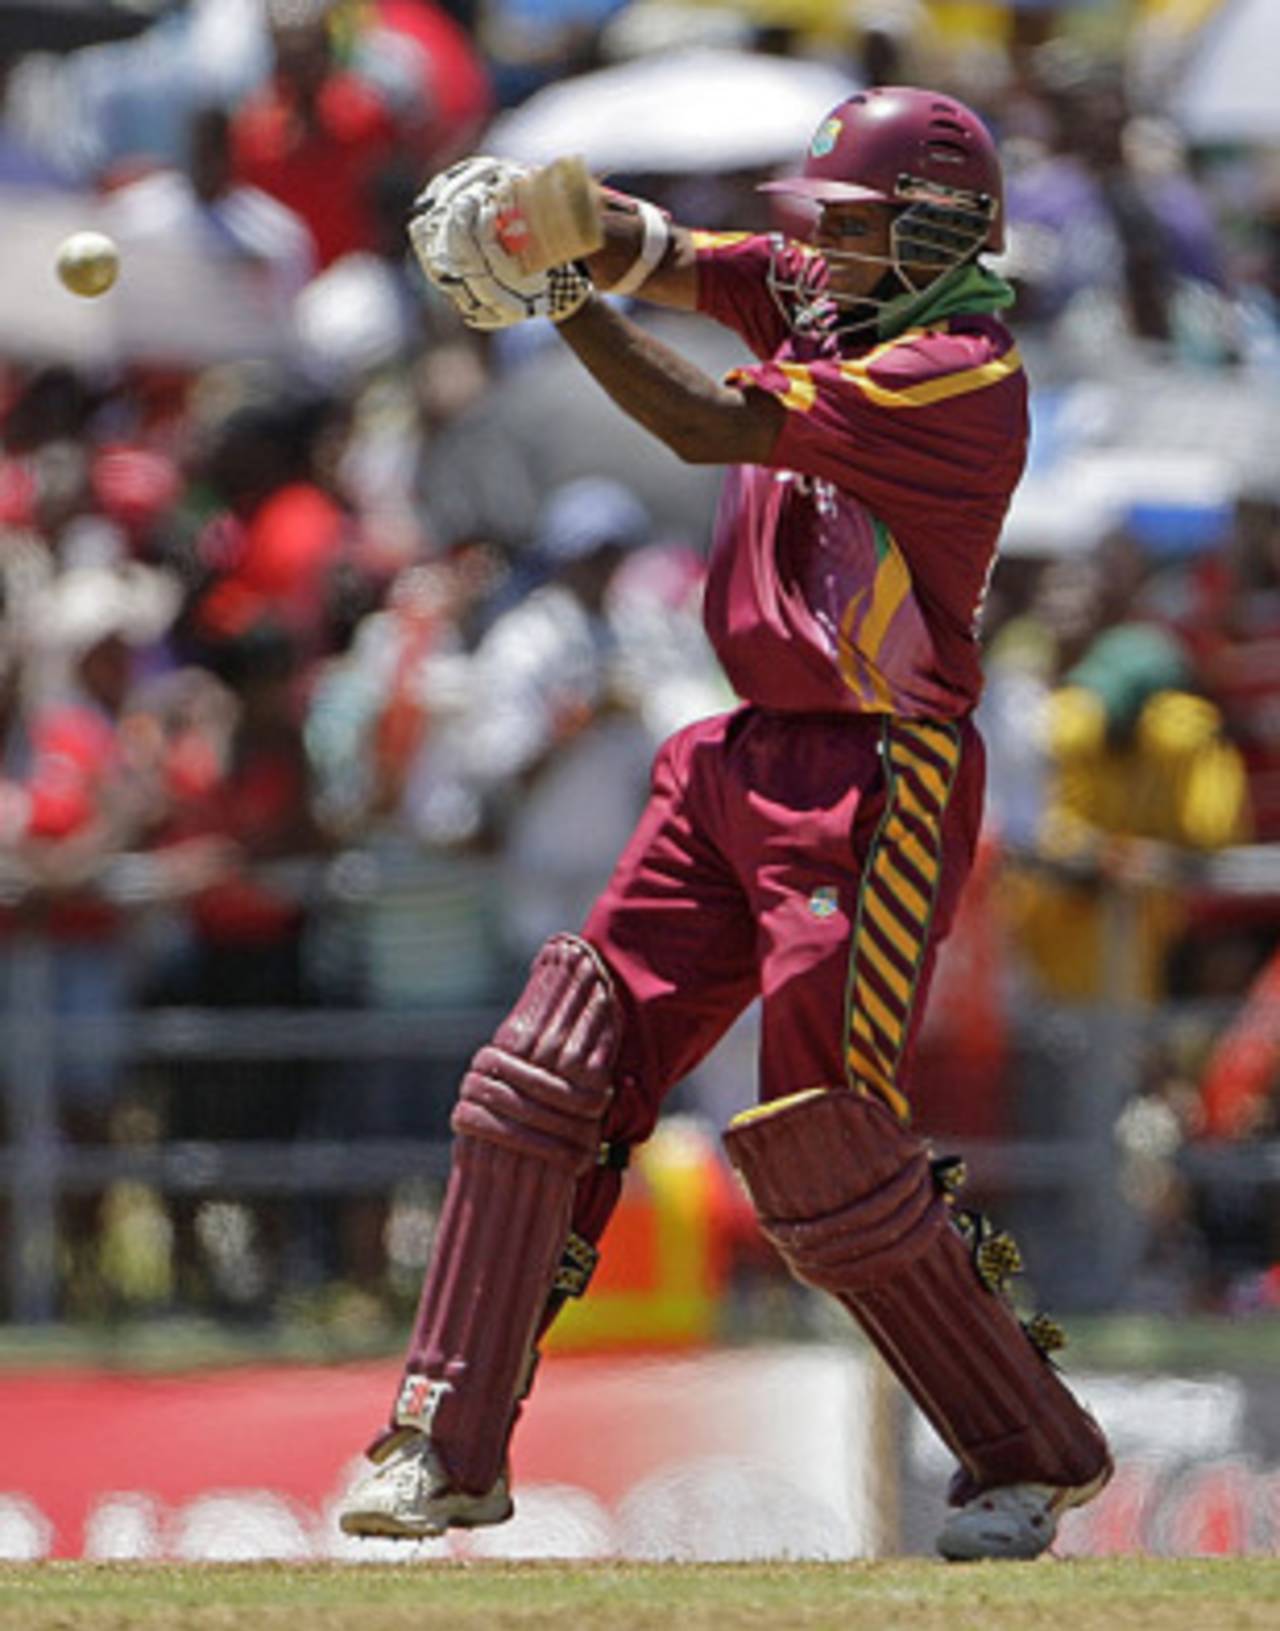 The argument against Shivnarine Chanderpaul's exclusion from the ODI side doesn't hold up against the gaping weakness that has plagued West Indies&nbsp;&nbsp;&bull;&nbsp;&nbsp;Associated Press